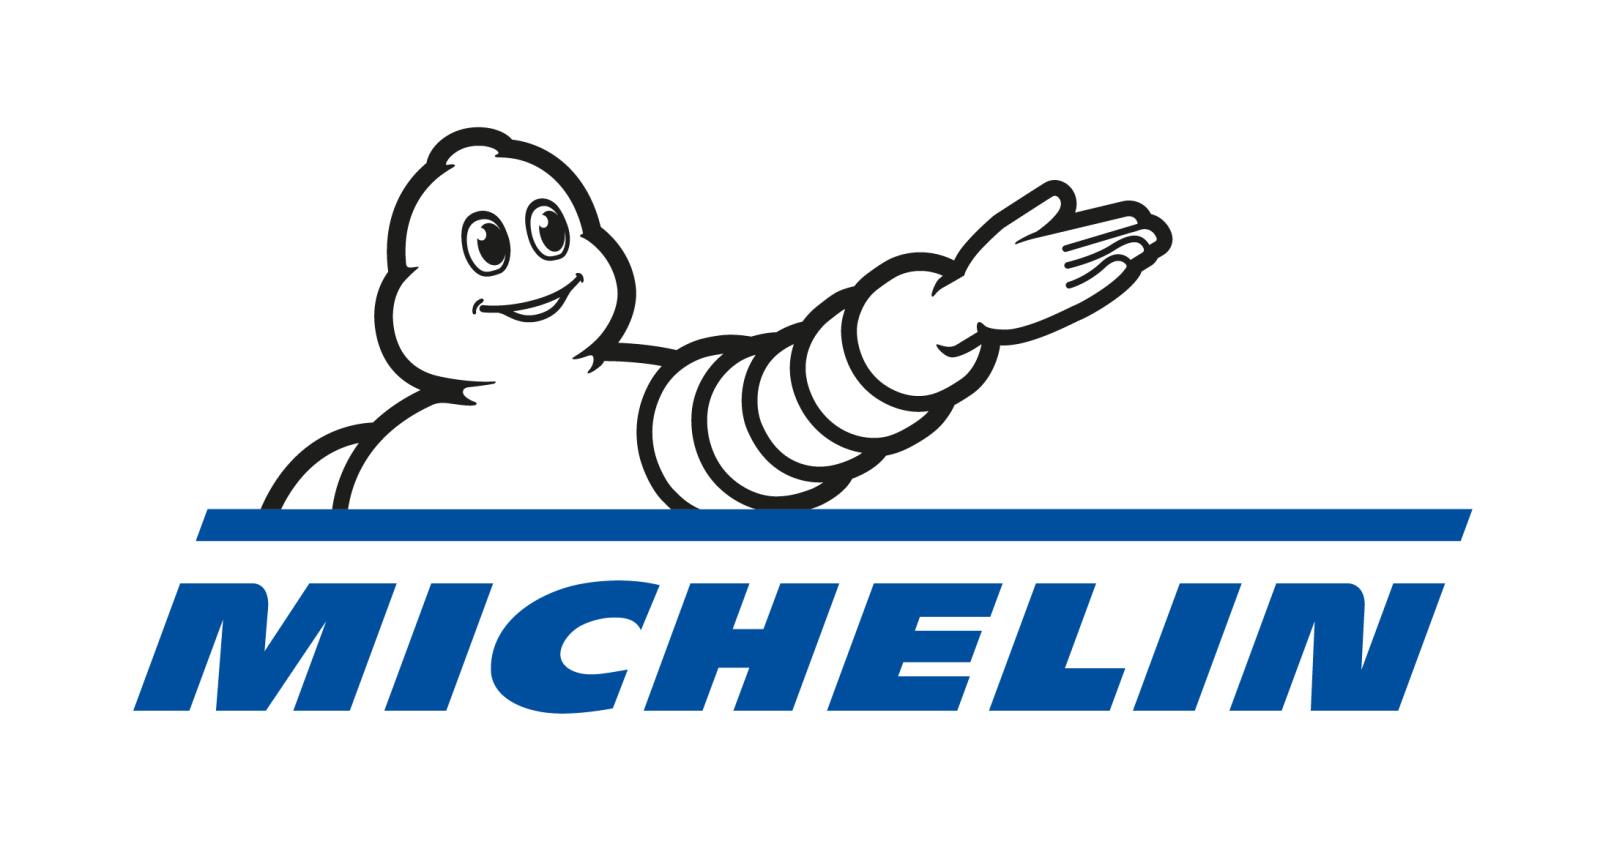 Michelin Logo Png Download - 